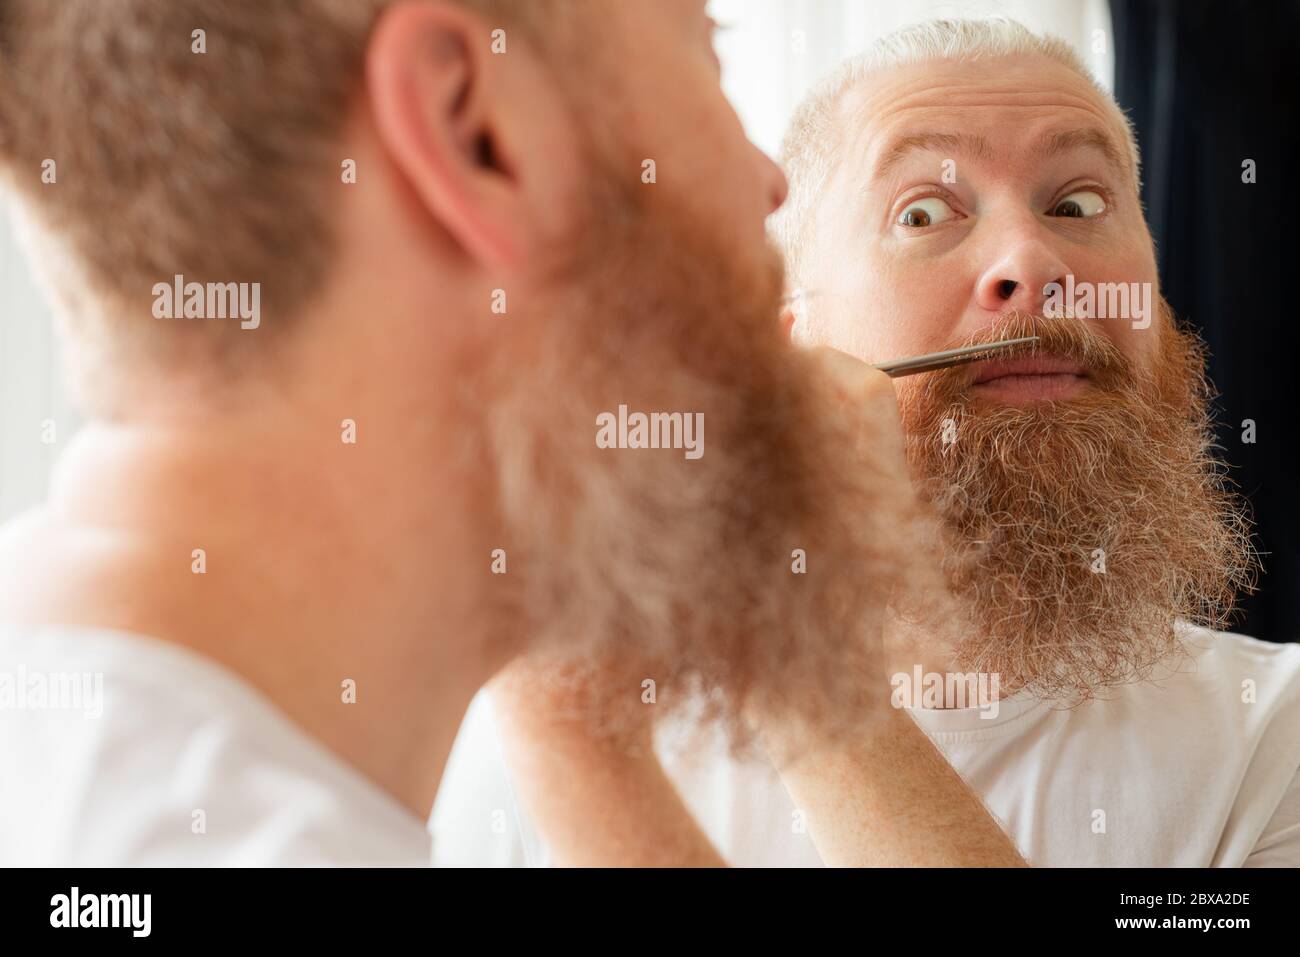 Attractive middle-aged man cutting his moustache and beard by himself in front of mirror at home. Beard care during quarantine Stock Photo